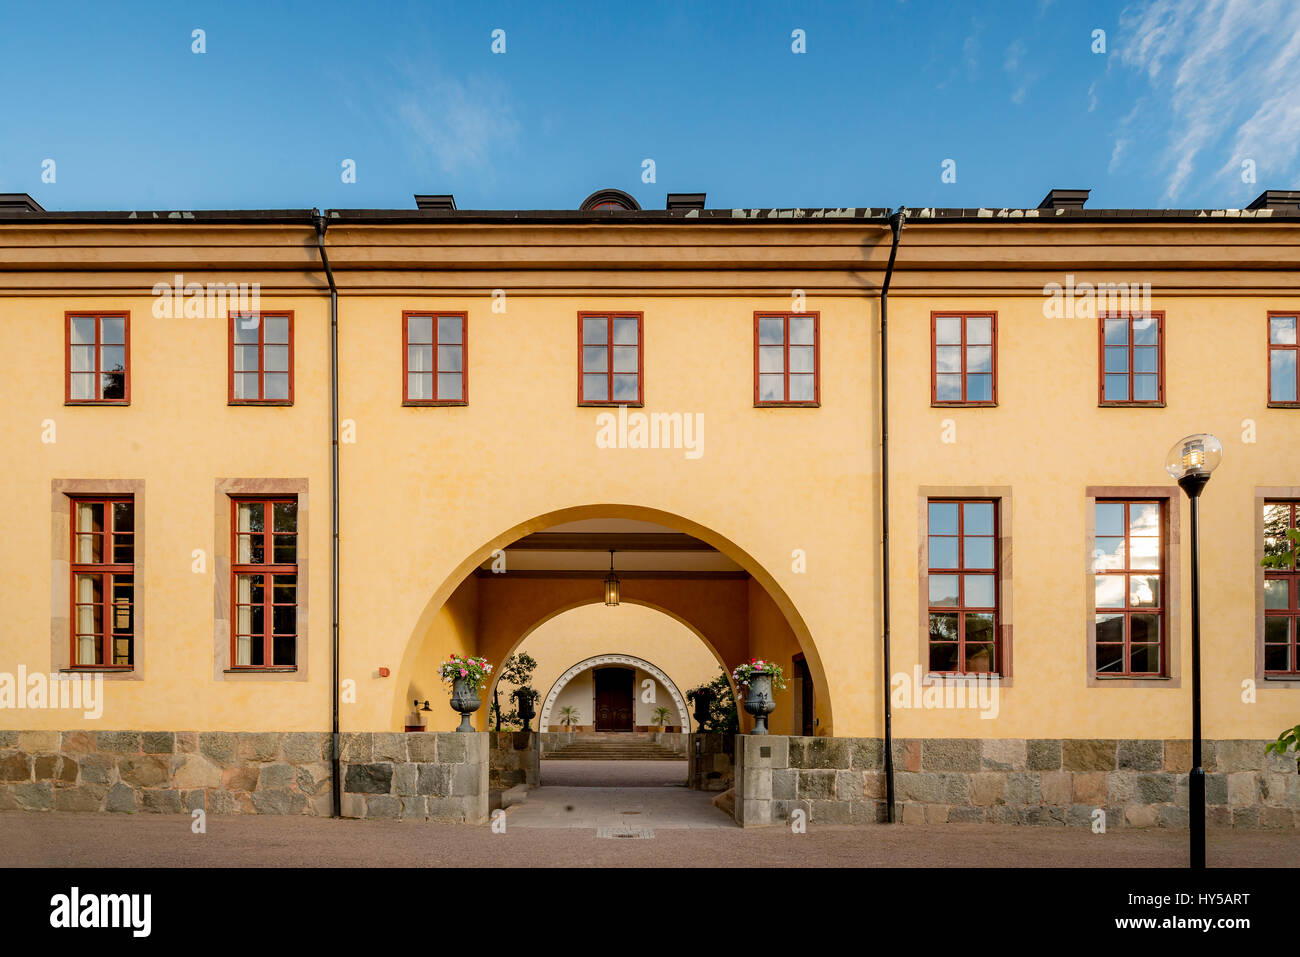 Sweden, Uppland, Uppsala, Arched entrance of yellow building in Linnean Gardens of Uppsala Stock Photo